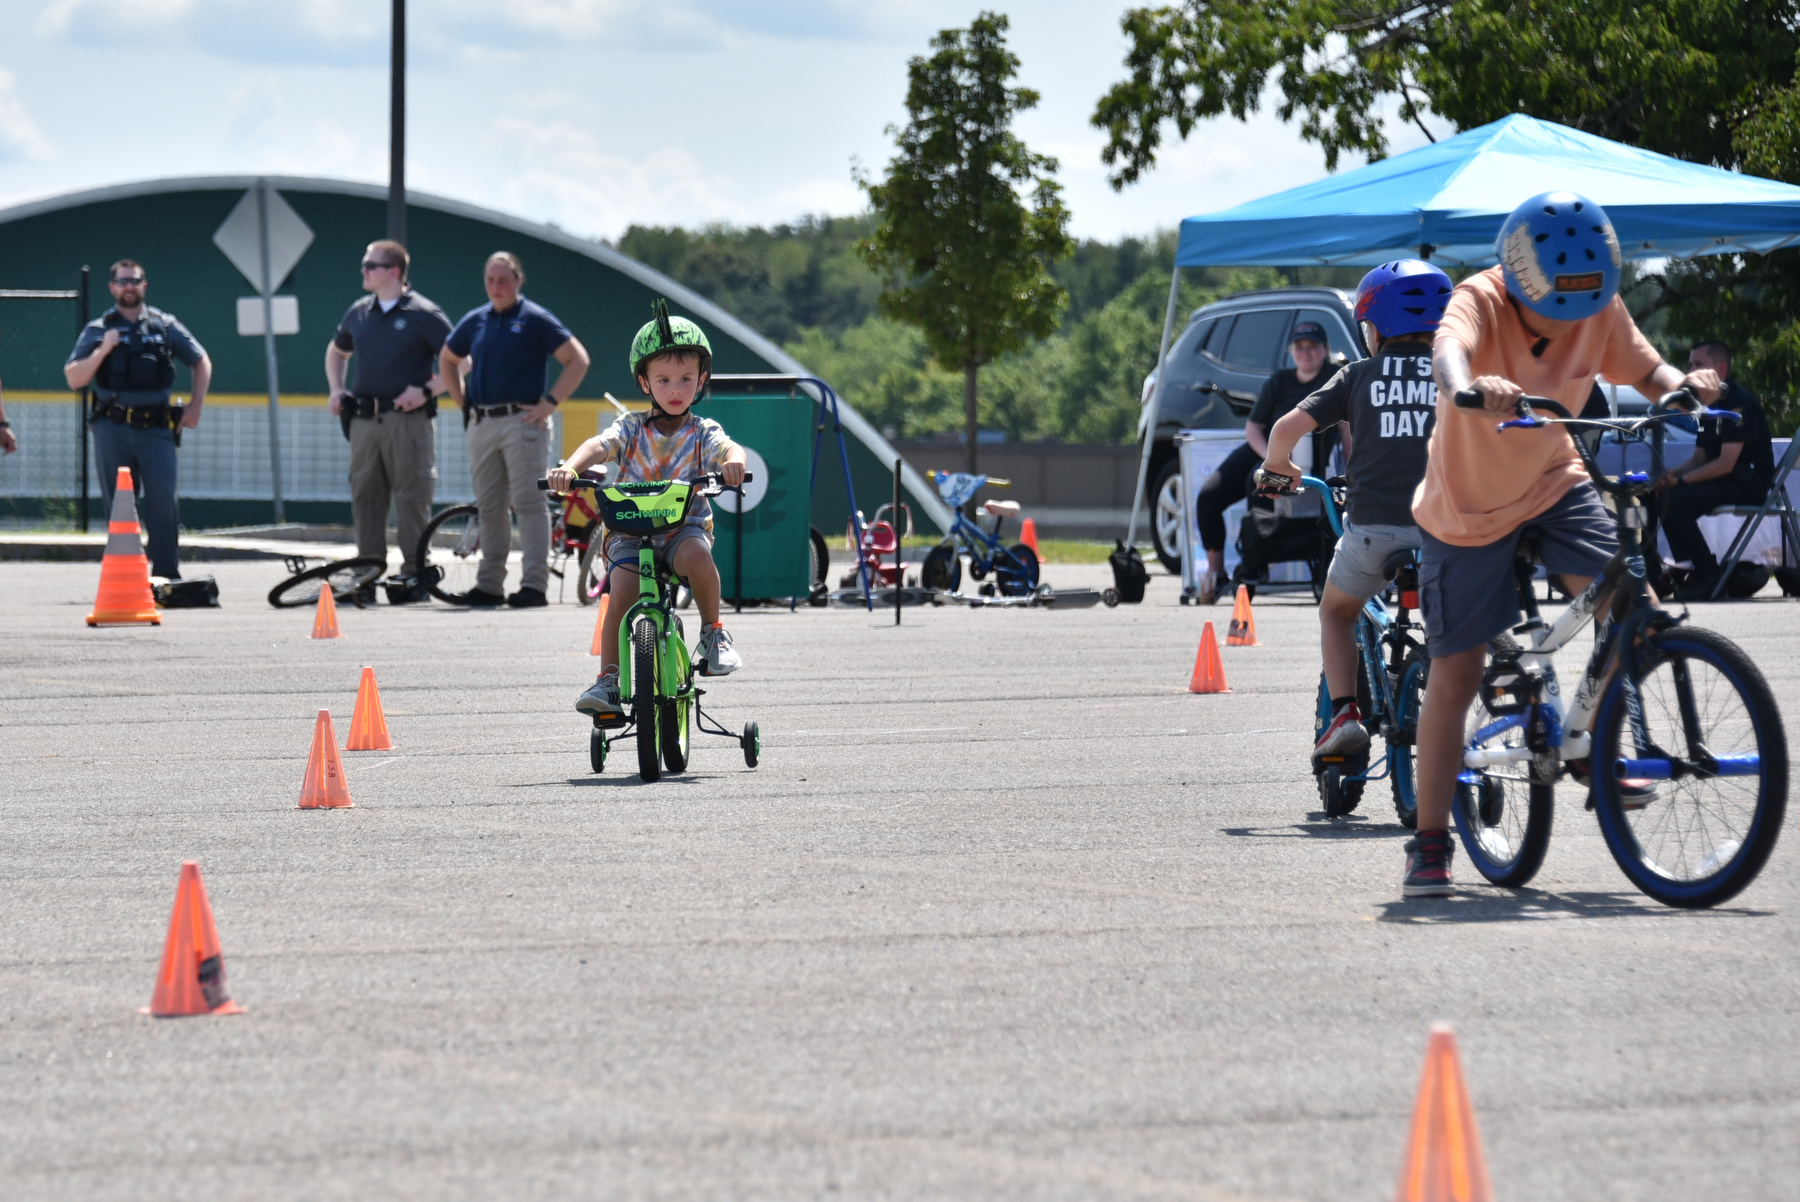 University Police partnered with the Oswego Police Department, Oswego County Traffic Safety Board, Oswego County Health Department and other local agencies to host a community bike rodeo for youngsters in the Oswego area. 